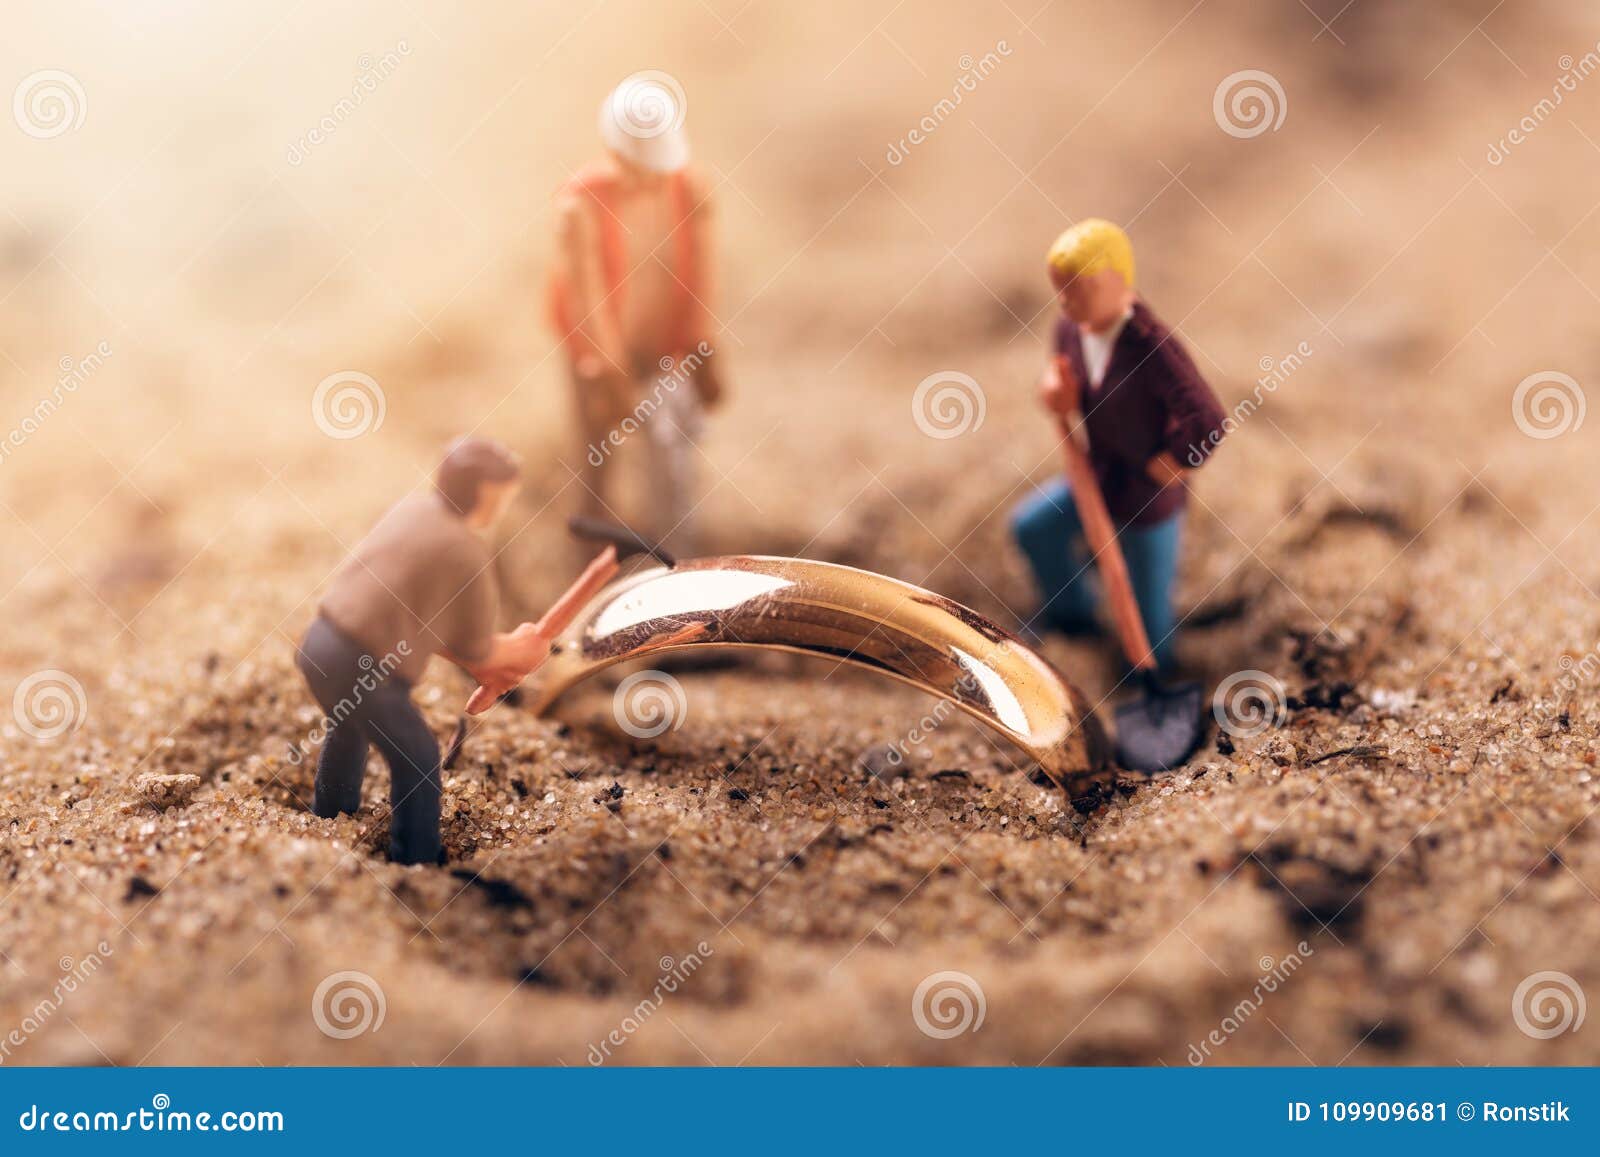 gold digging or archaeology concept